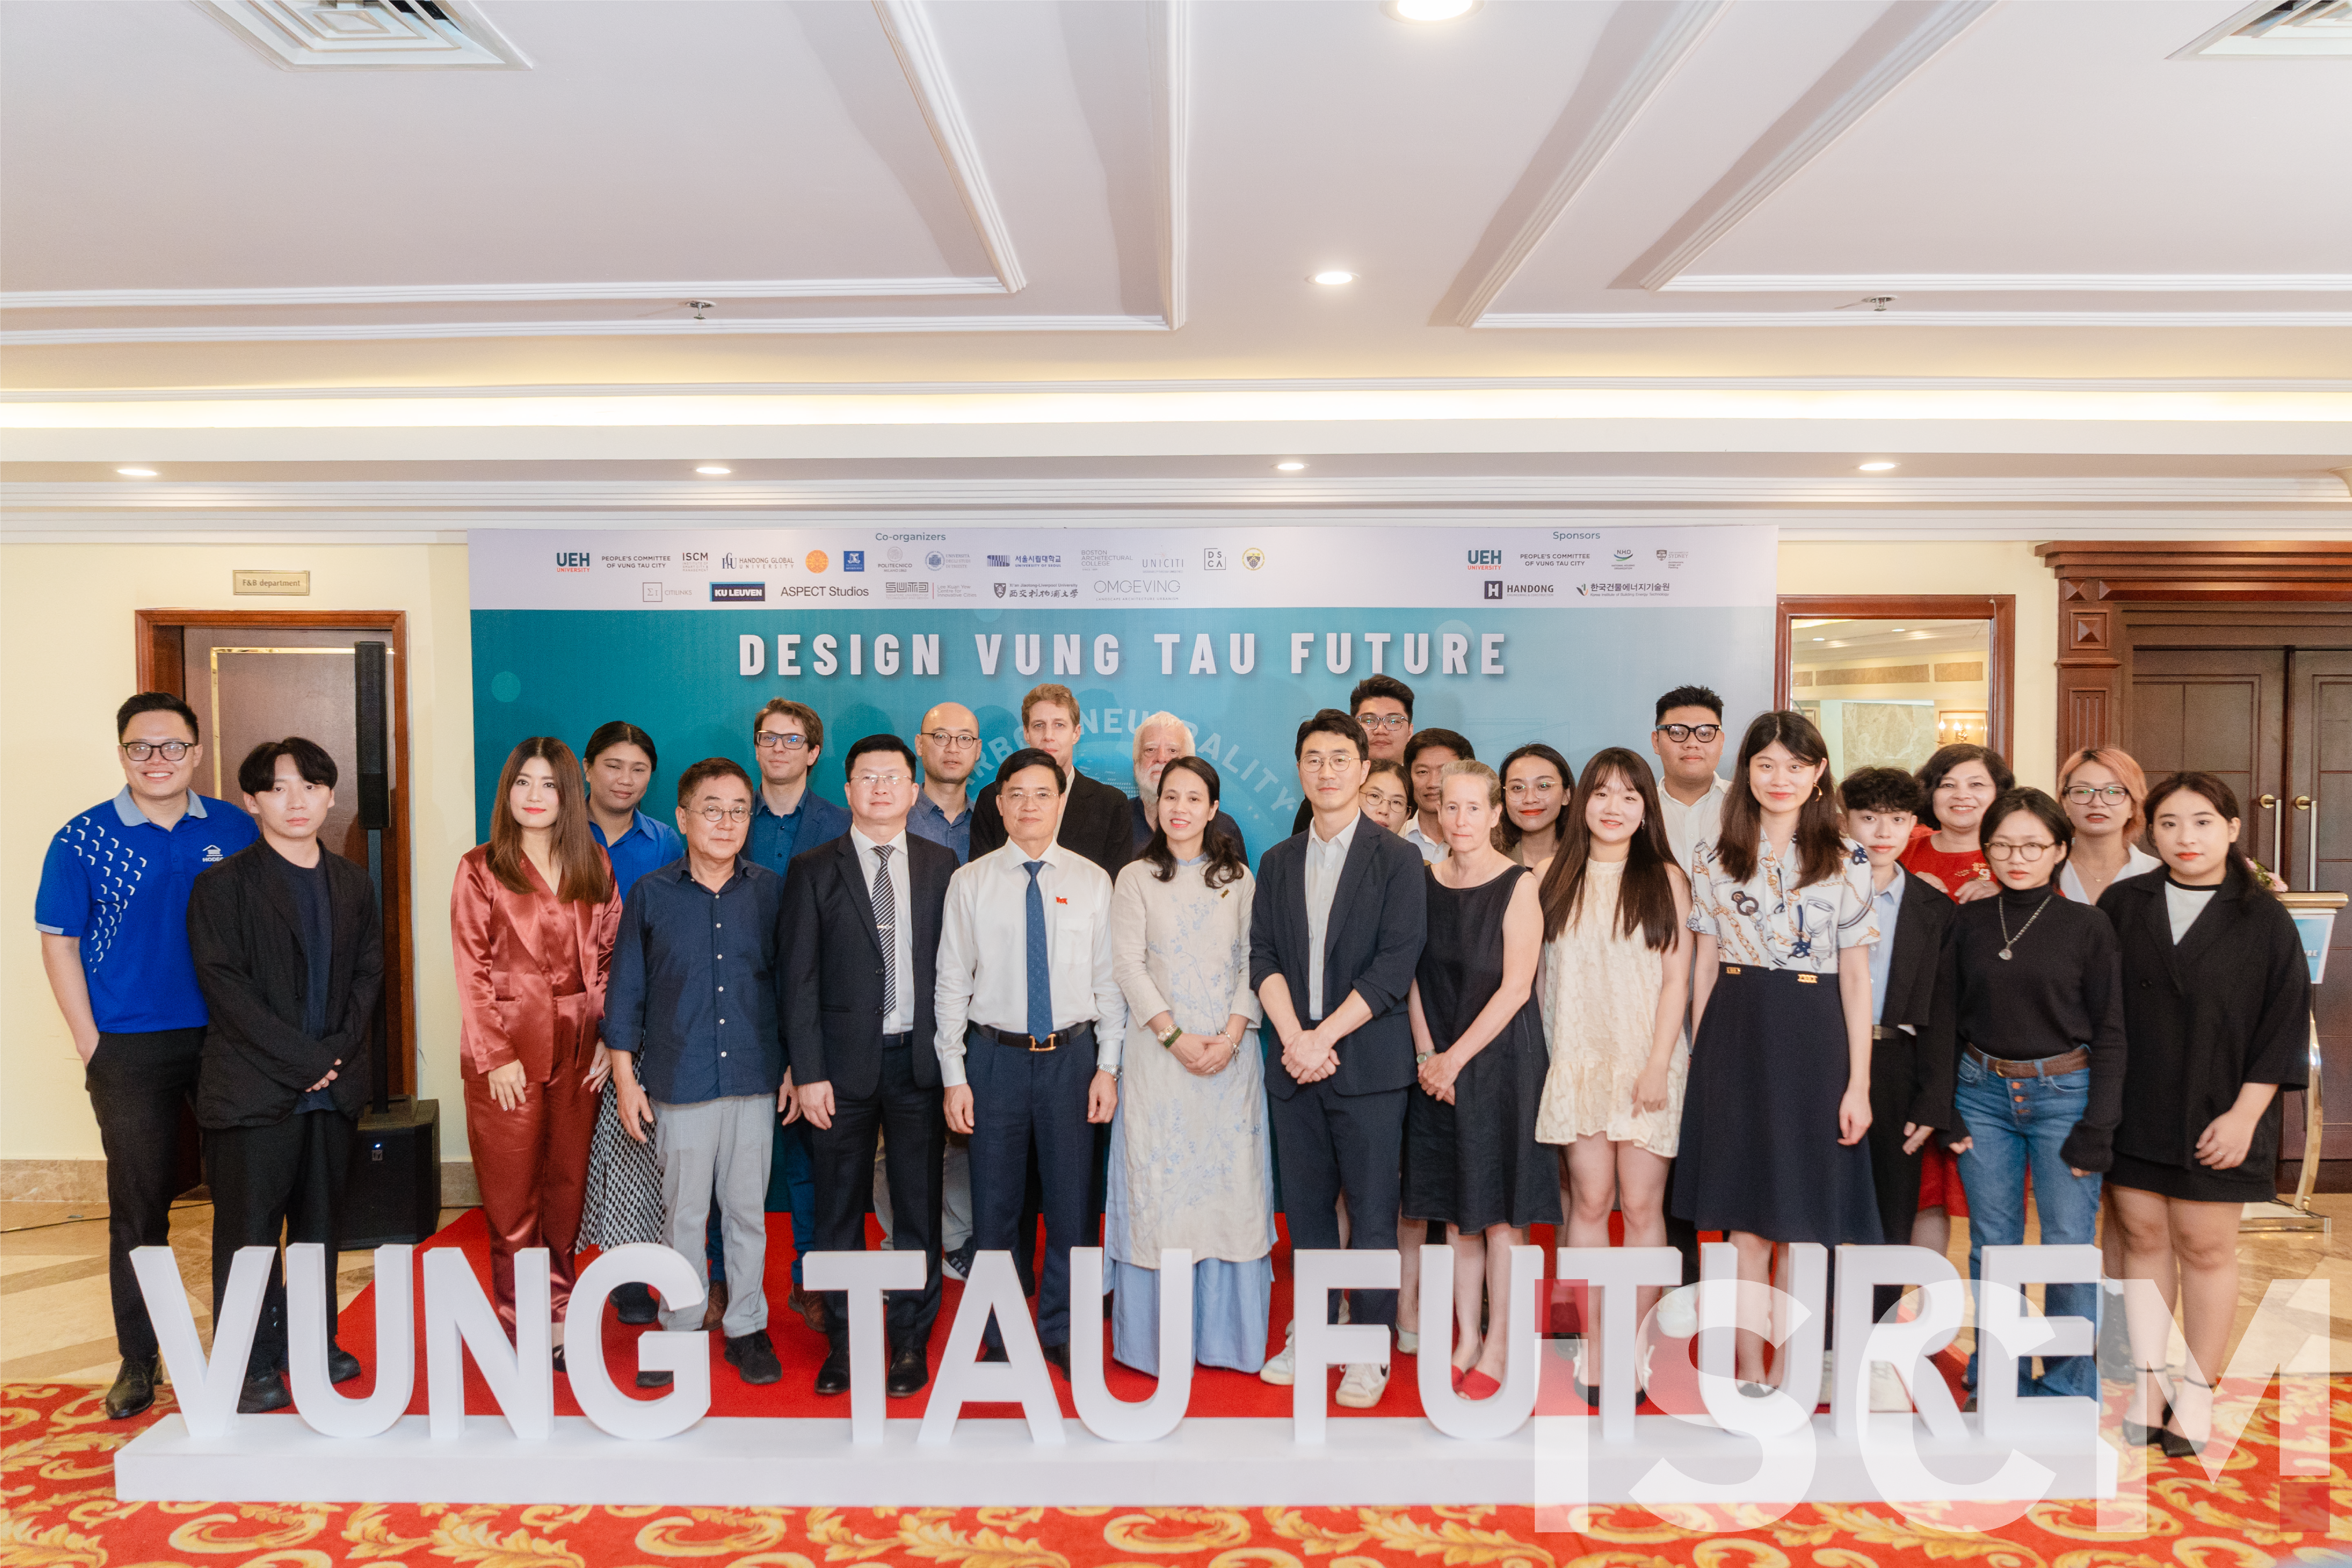 LOOKING BACK AT THE SERIES OF VUNG TAU FUTURE EVENTS IN VUNG TAU CITY IN 2024